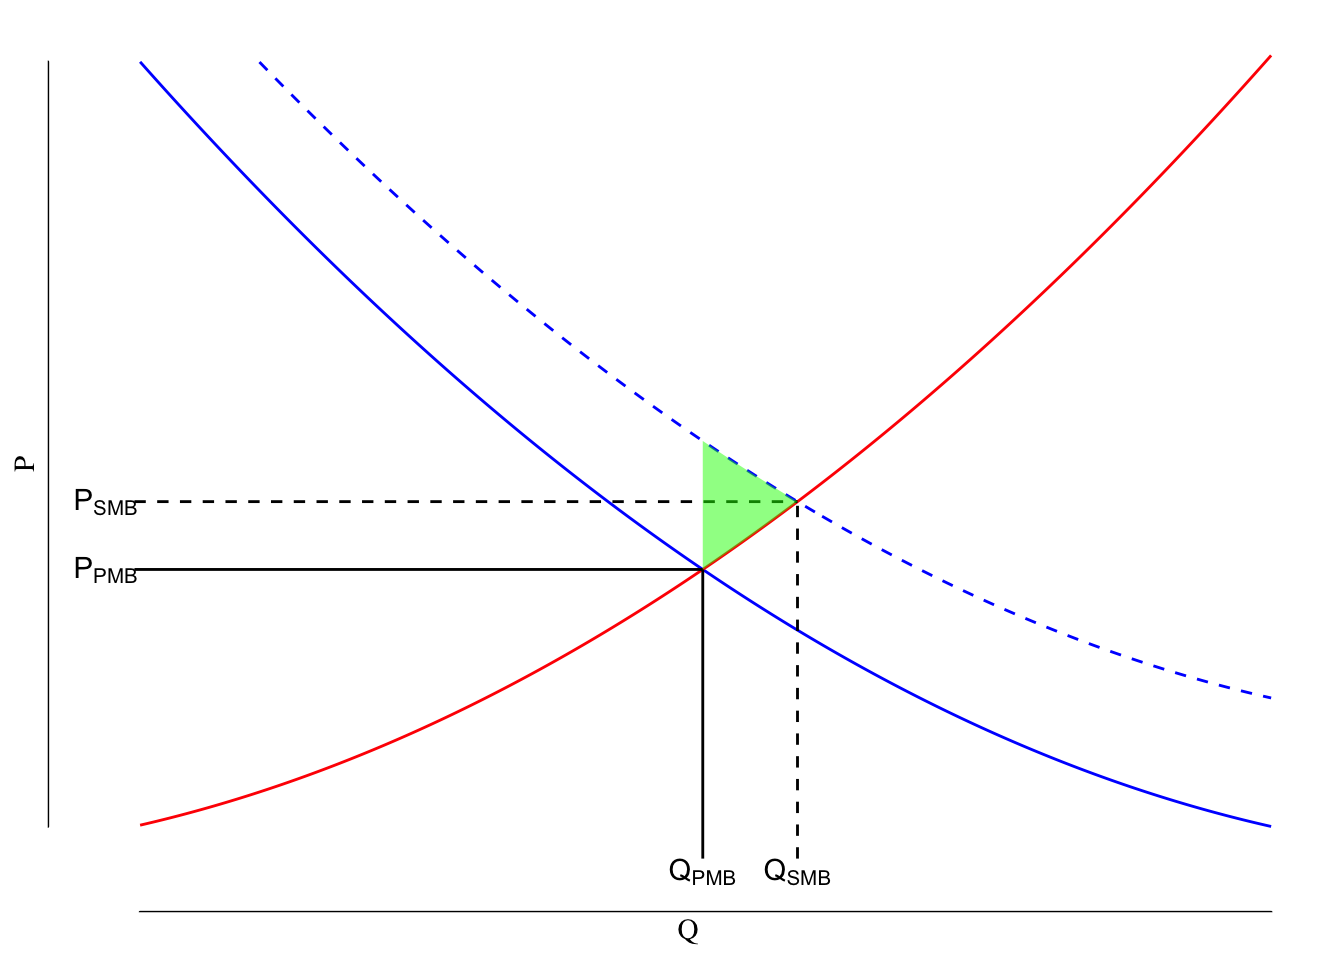 Example of a Positive Consumption Externality. The solid red line is the supply curve, the blue lines reflect demand with the solid blue line being the private marginal benefit (PMB) and the dashed blue line being the societial marginal benefit (SMB). The shaded green area is the deadweight loss associated with the positive consumption externality.